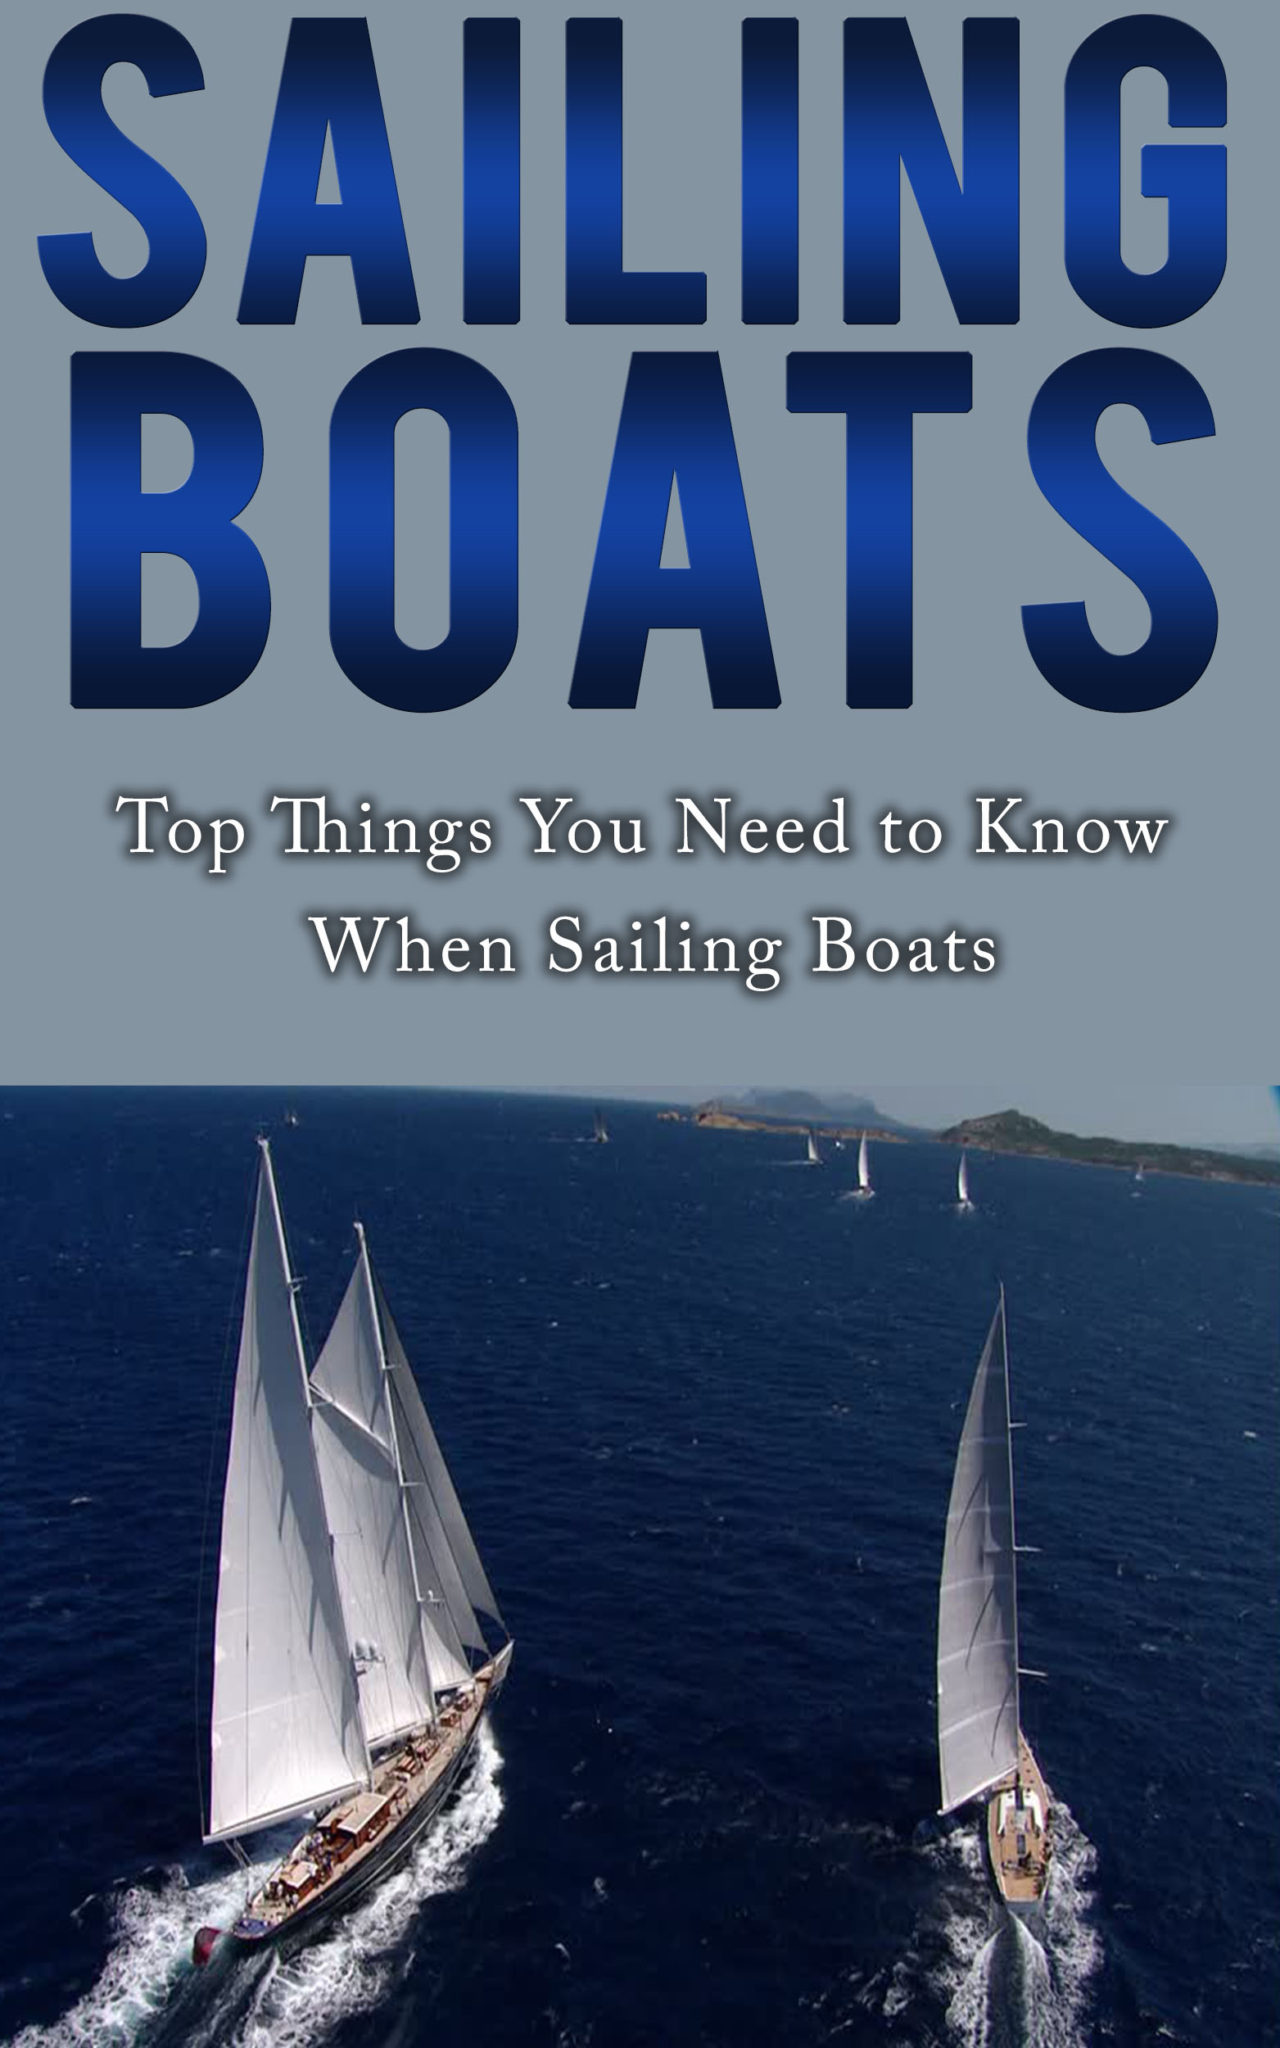 FREE: Sailing Books: Top Things You Need to Know When Sailing Boats by James S